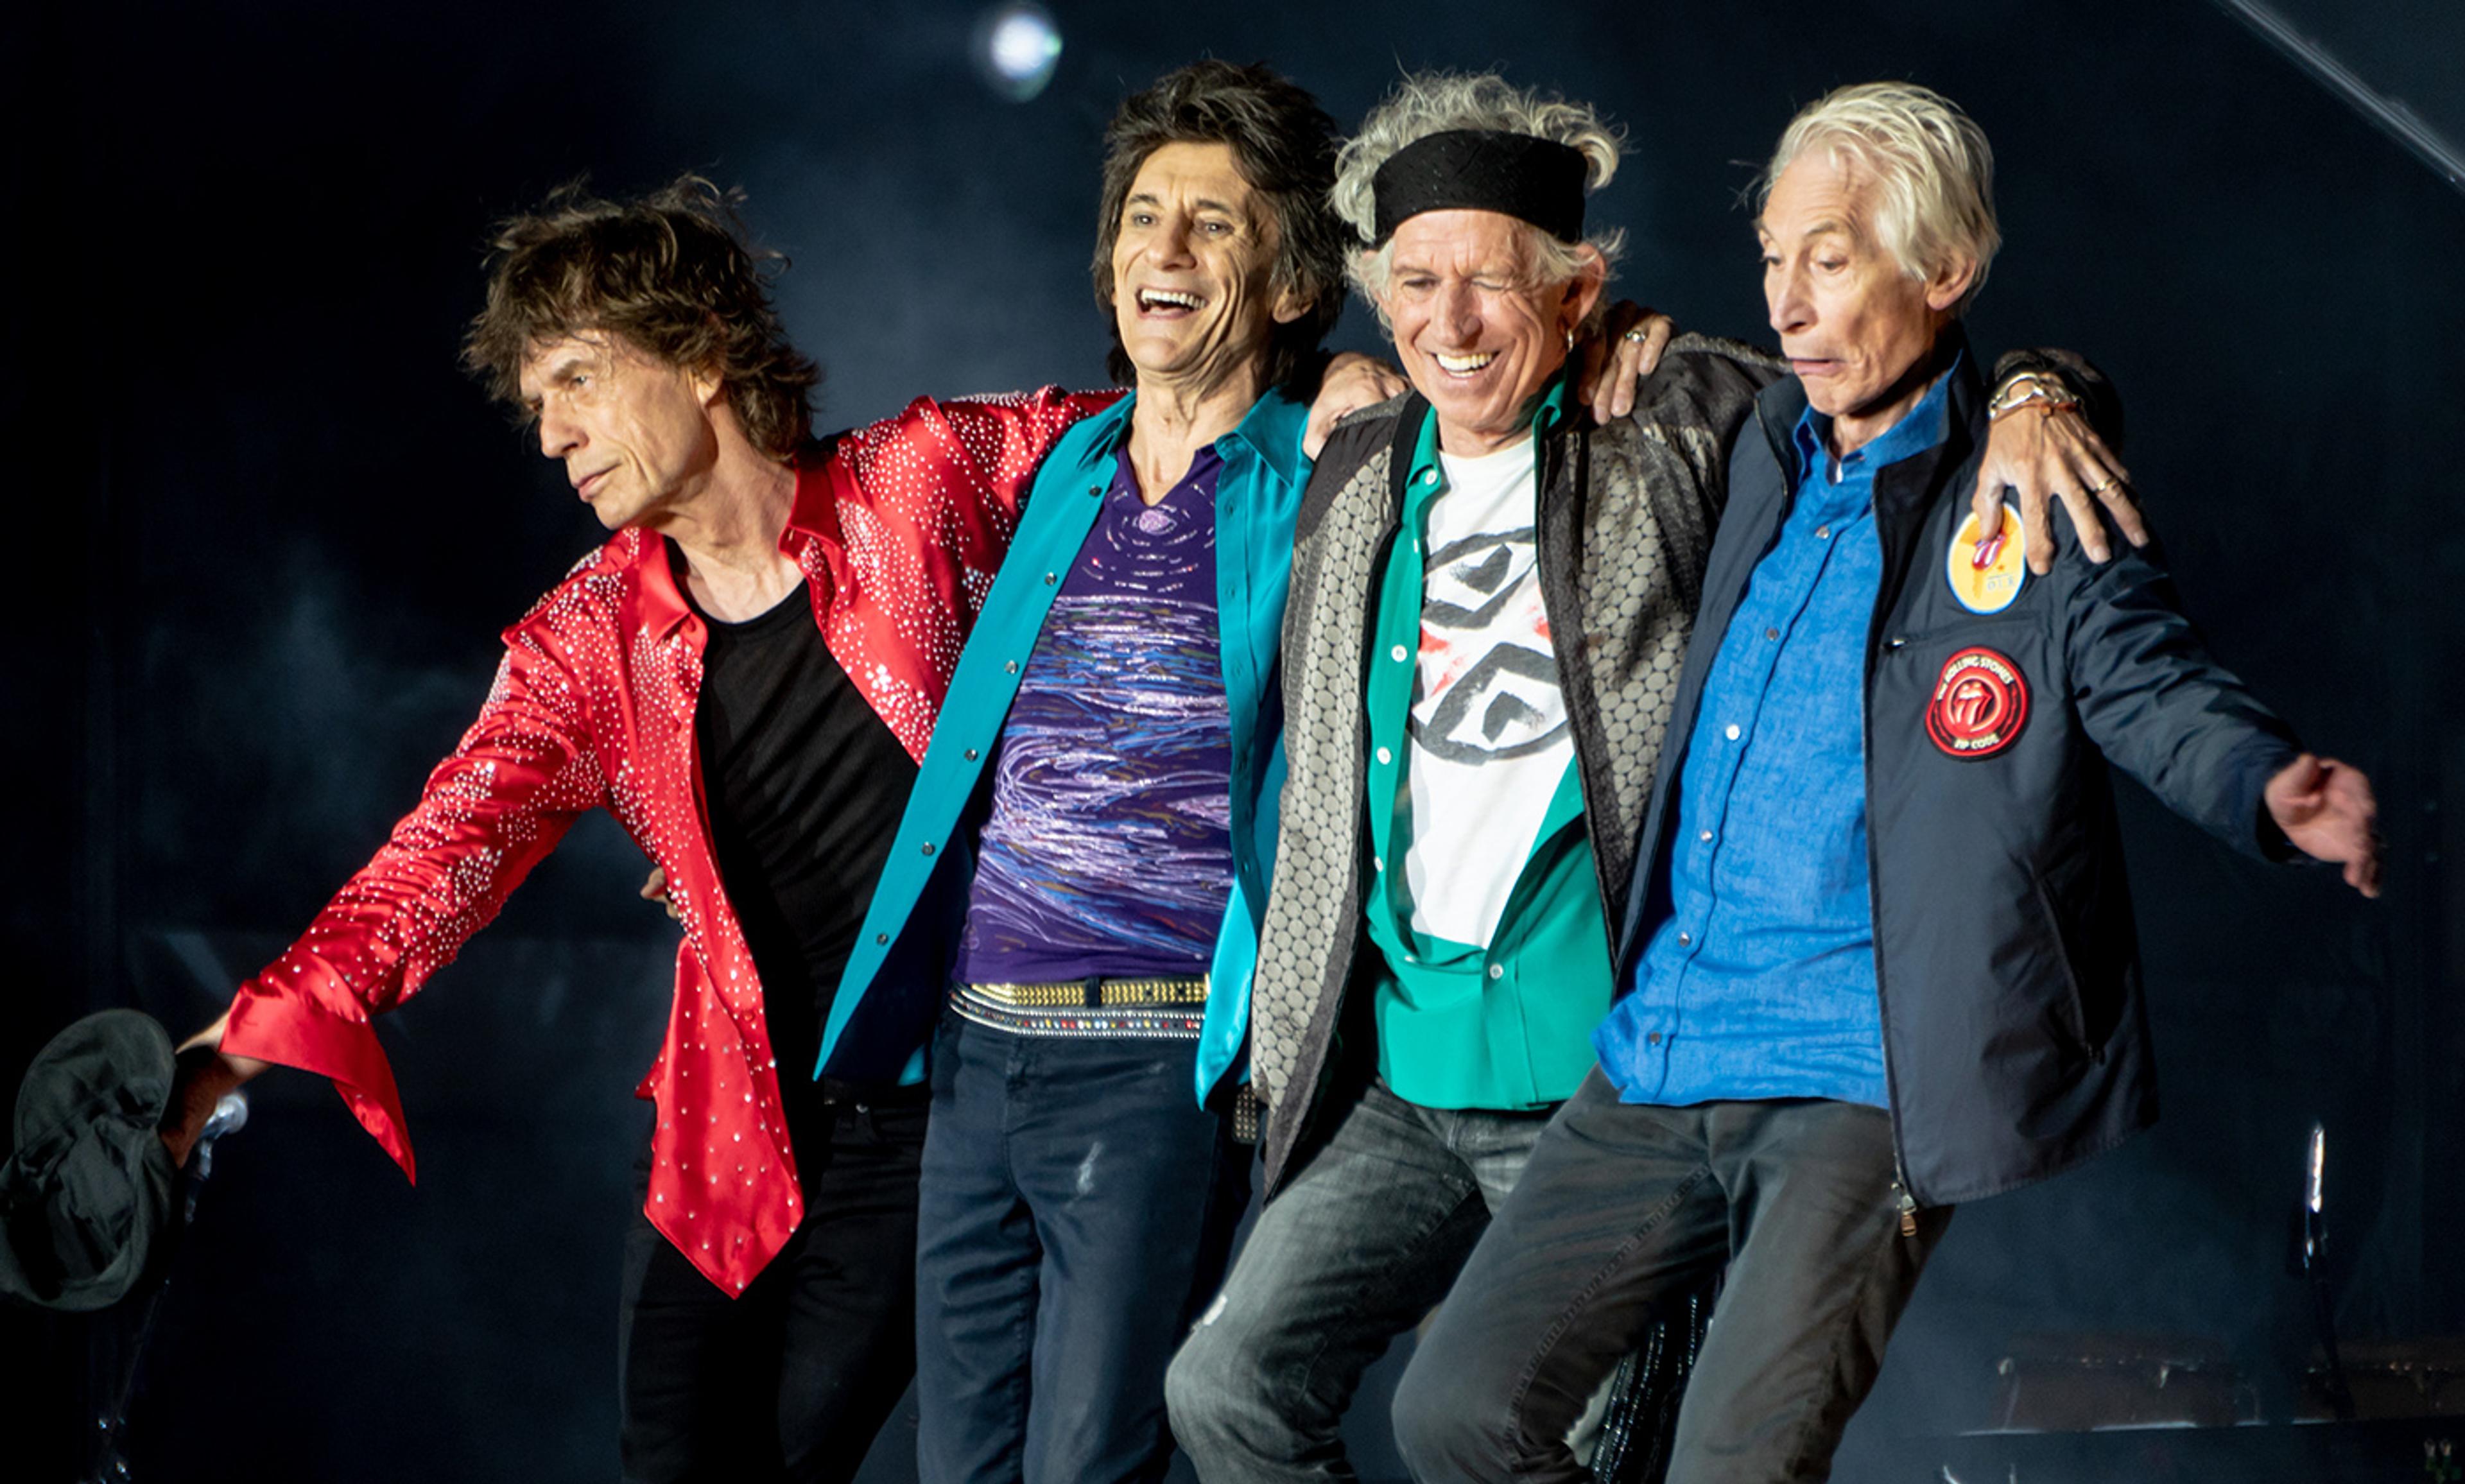 <p>Sprightly. The Rolling Stones live in London, 2018. <em>Photo by Ralph_PH/Flickr</em></p>